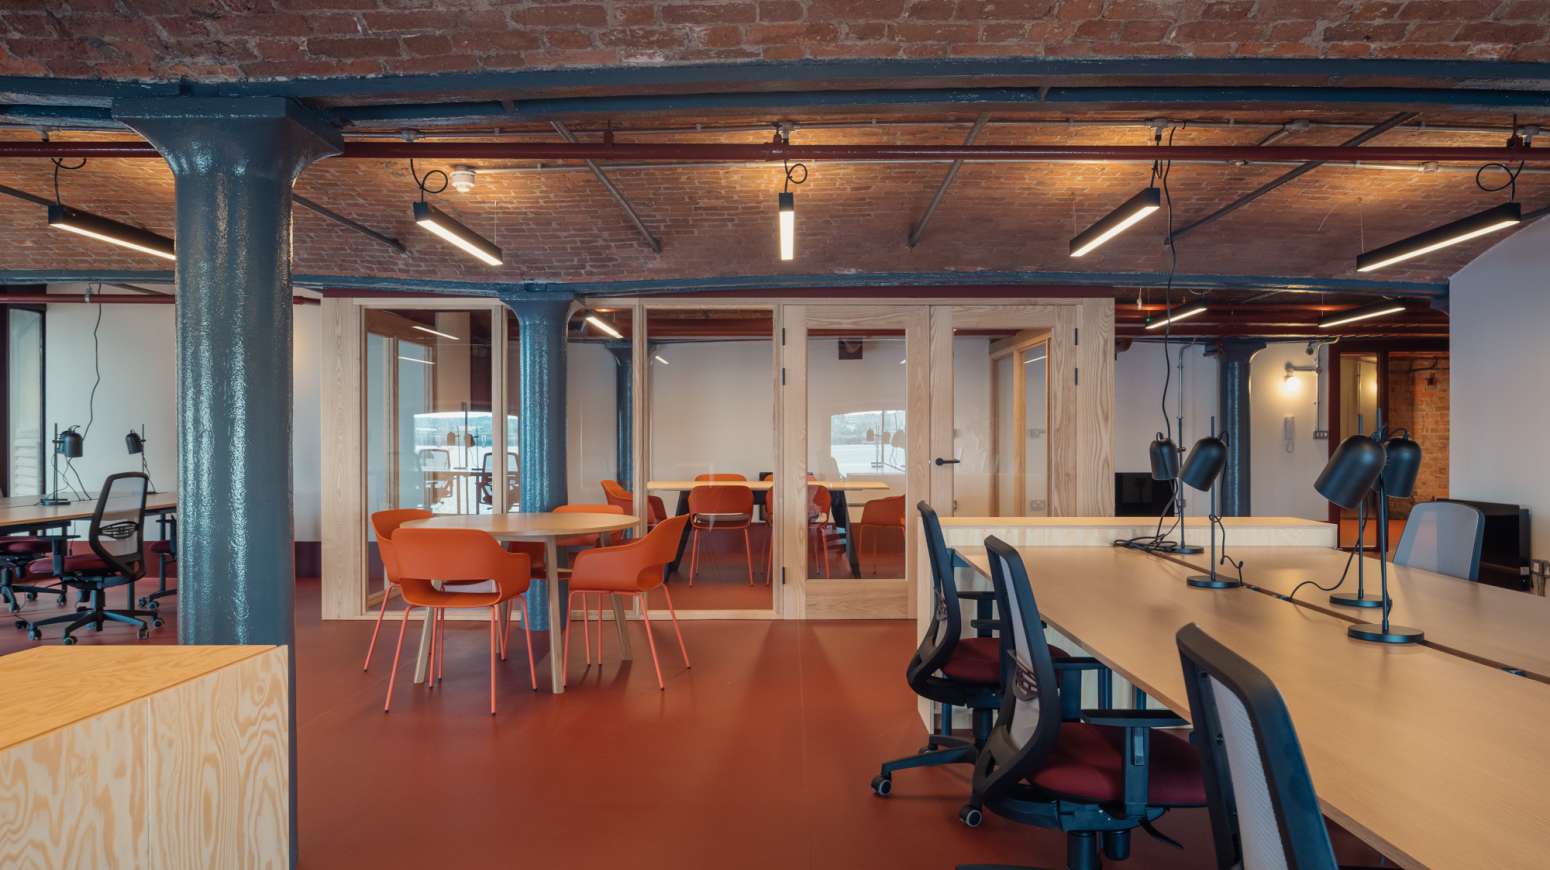 Interior of the open office includes timber meeting rooms